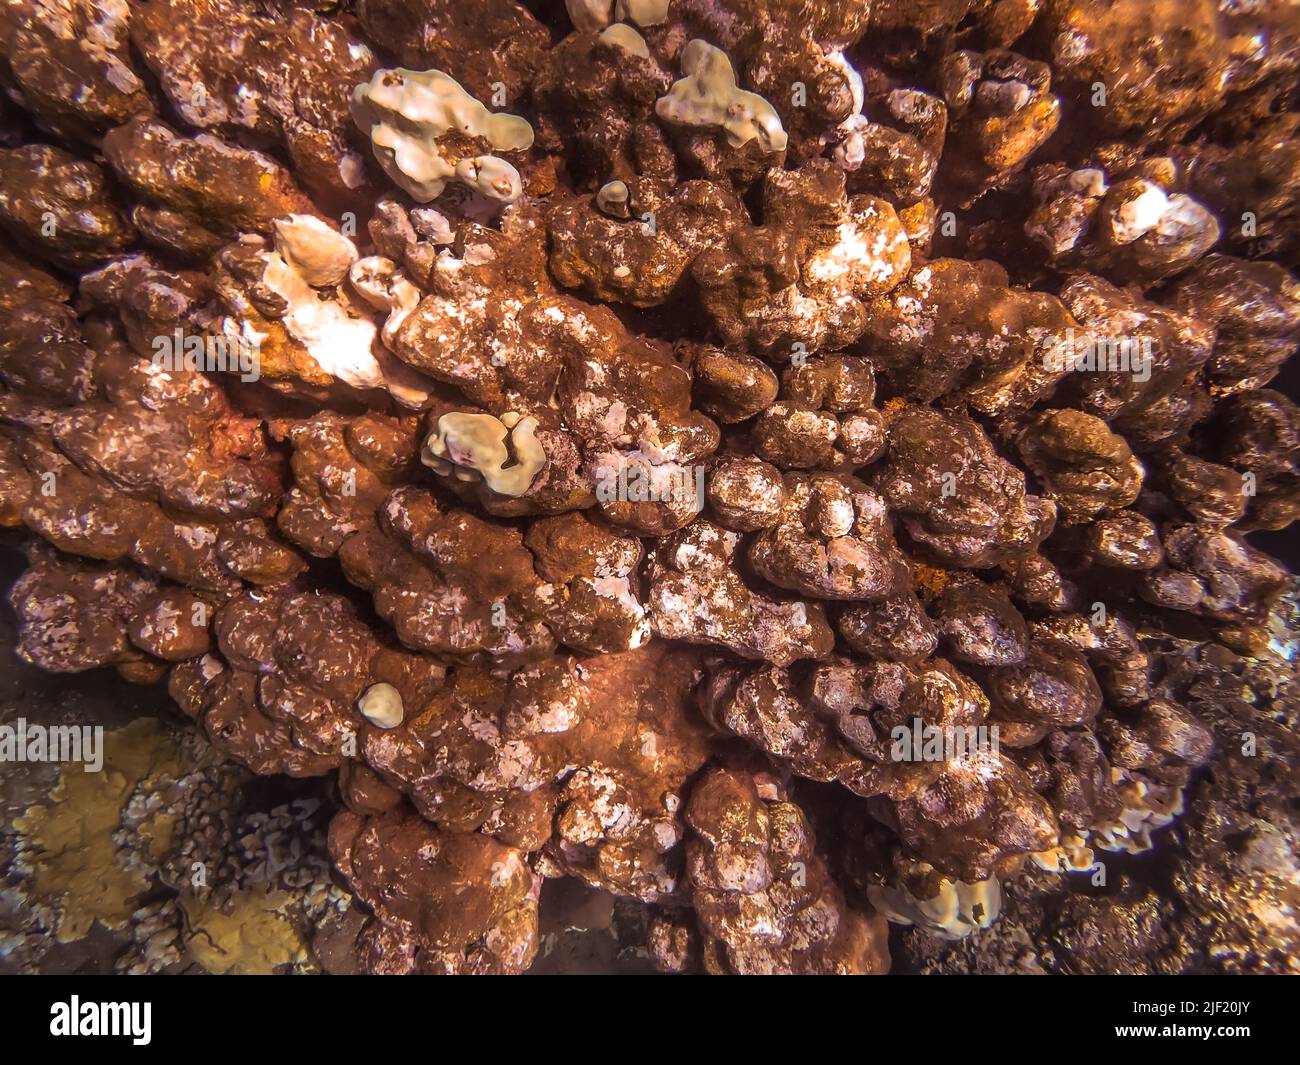 Underwater image of Pacific ocean water and the brown coral taken in Maui Hawaii. Stock Photo